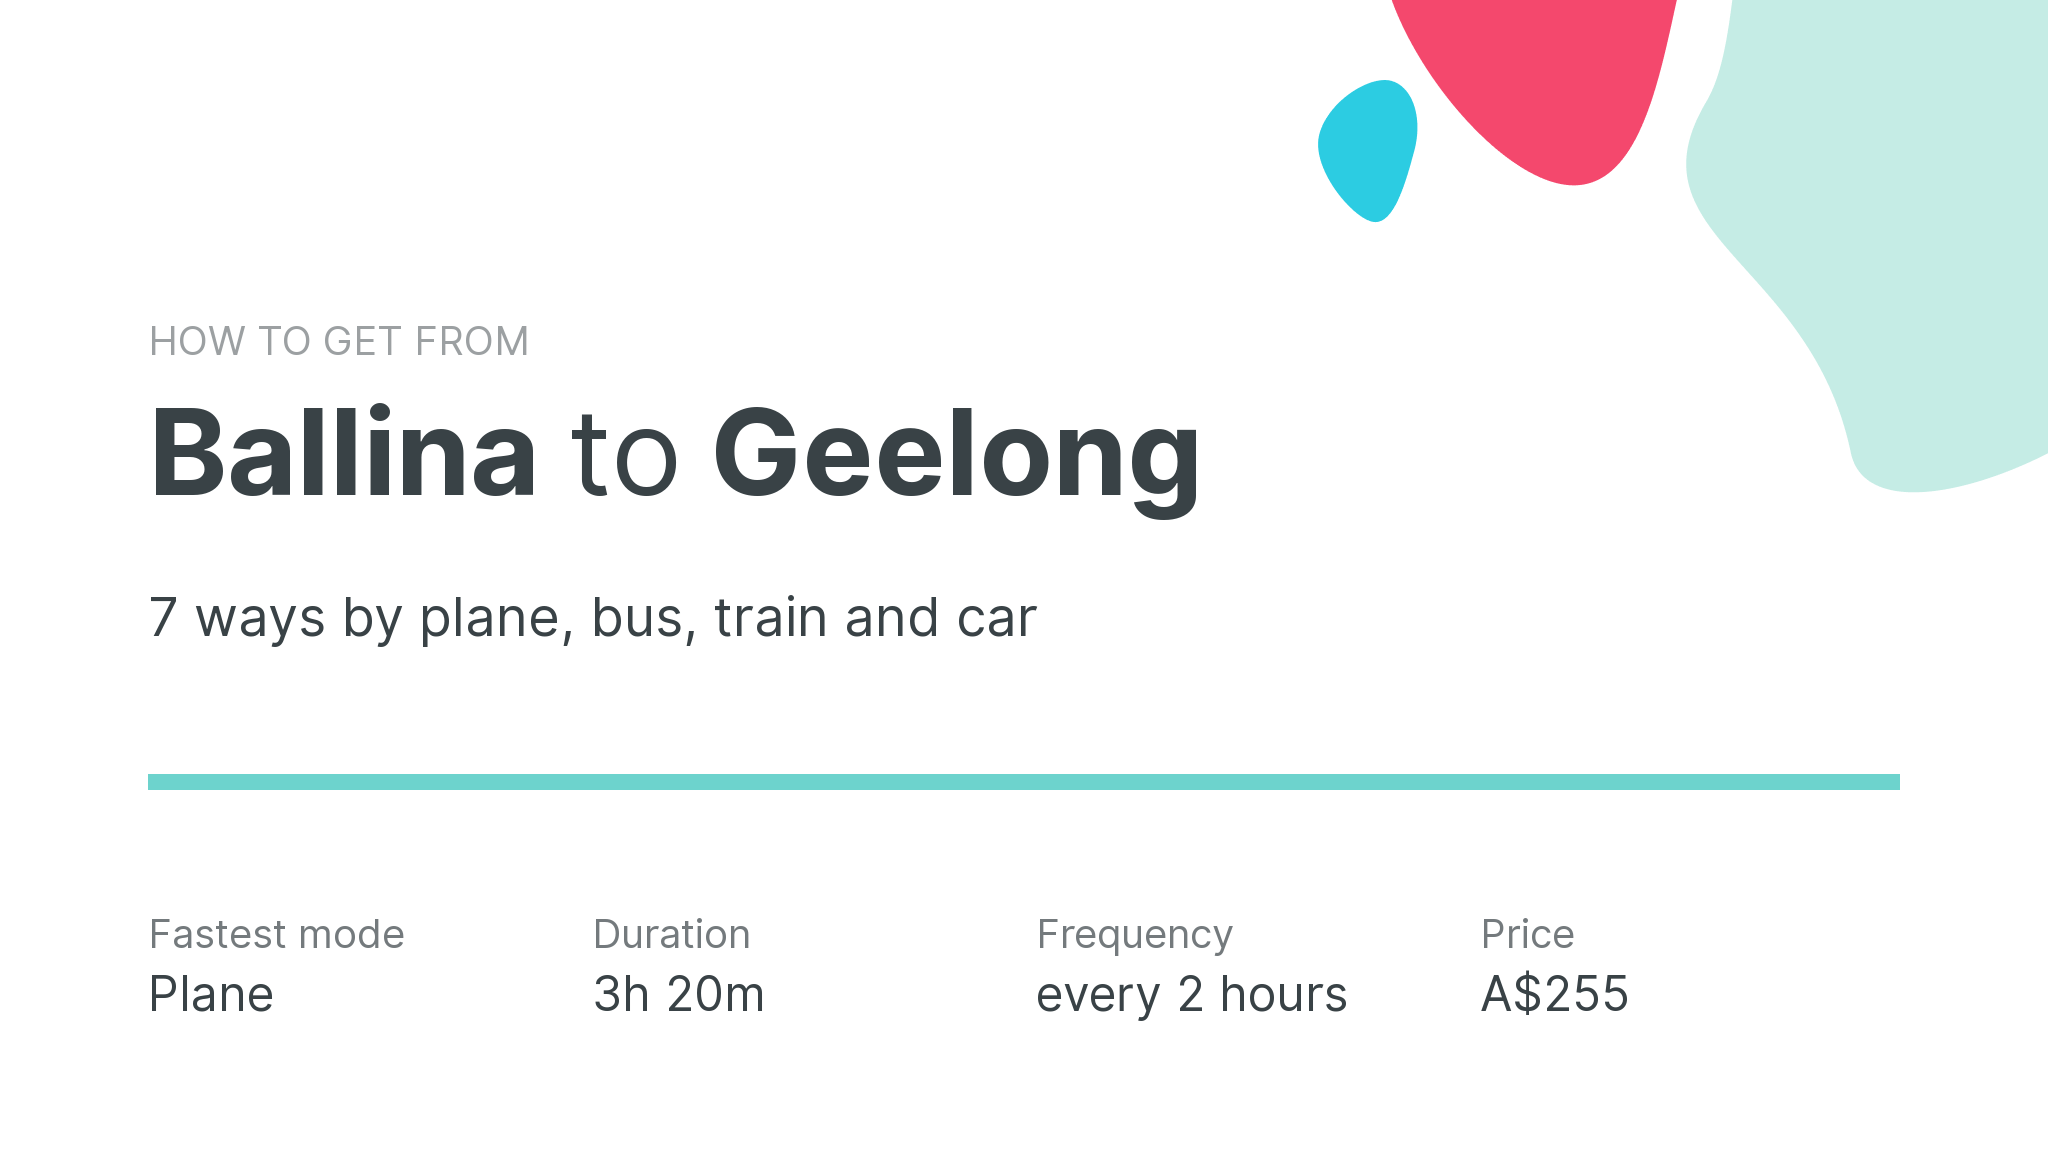 How do I get from Ballina to Geelong